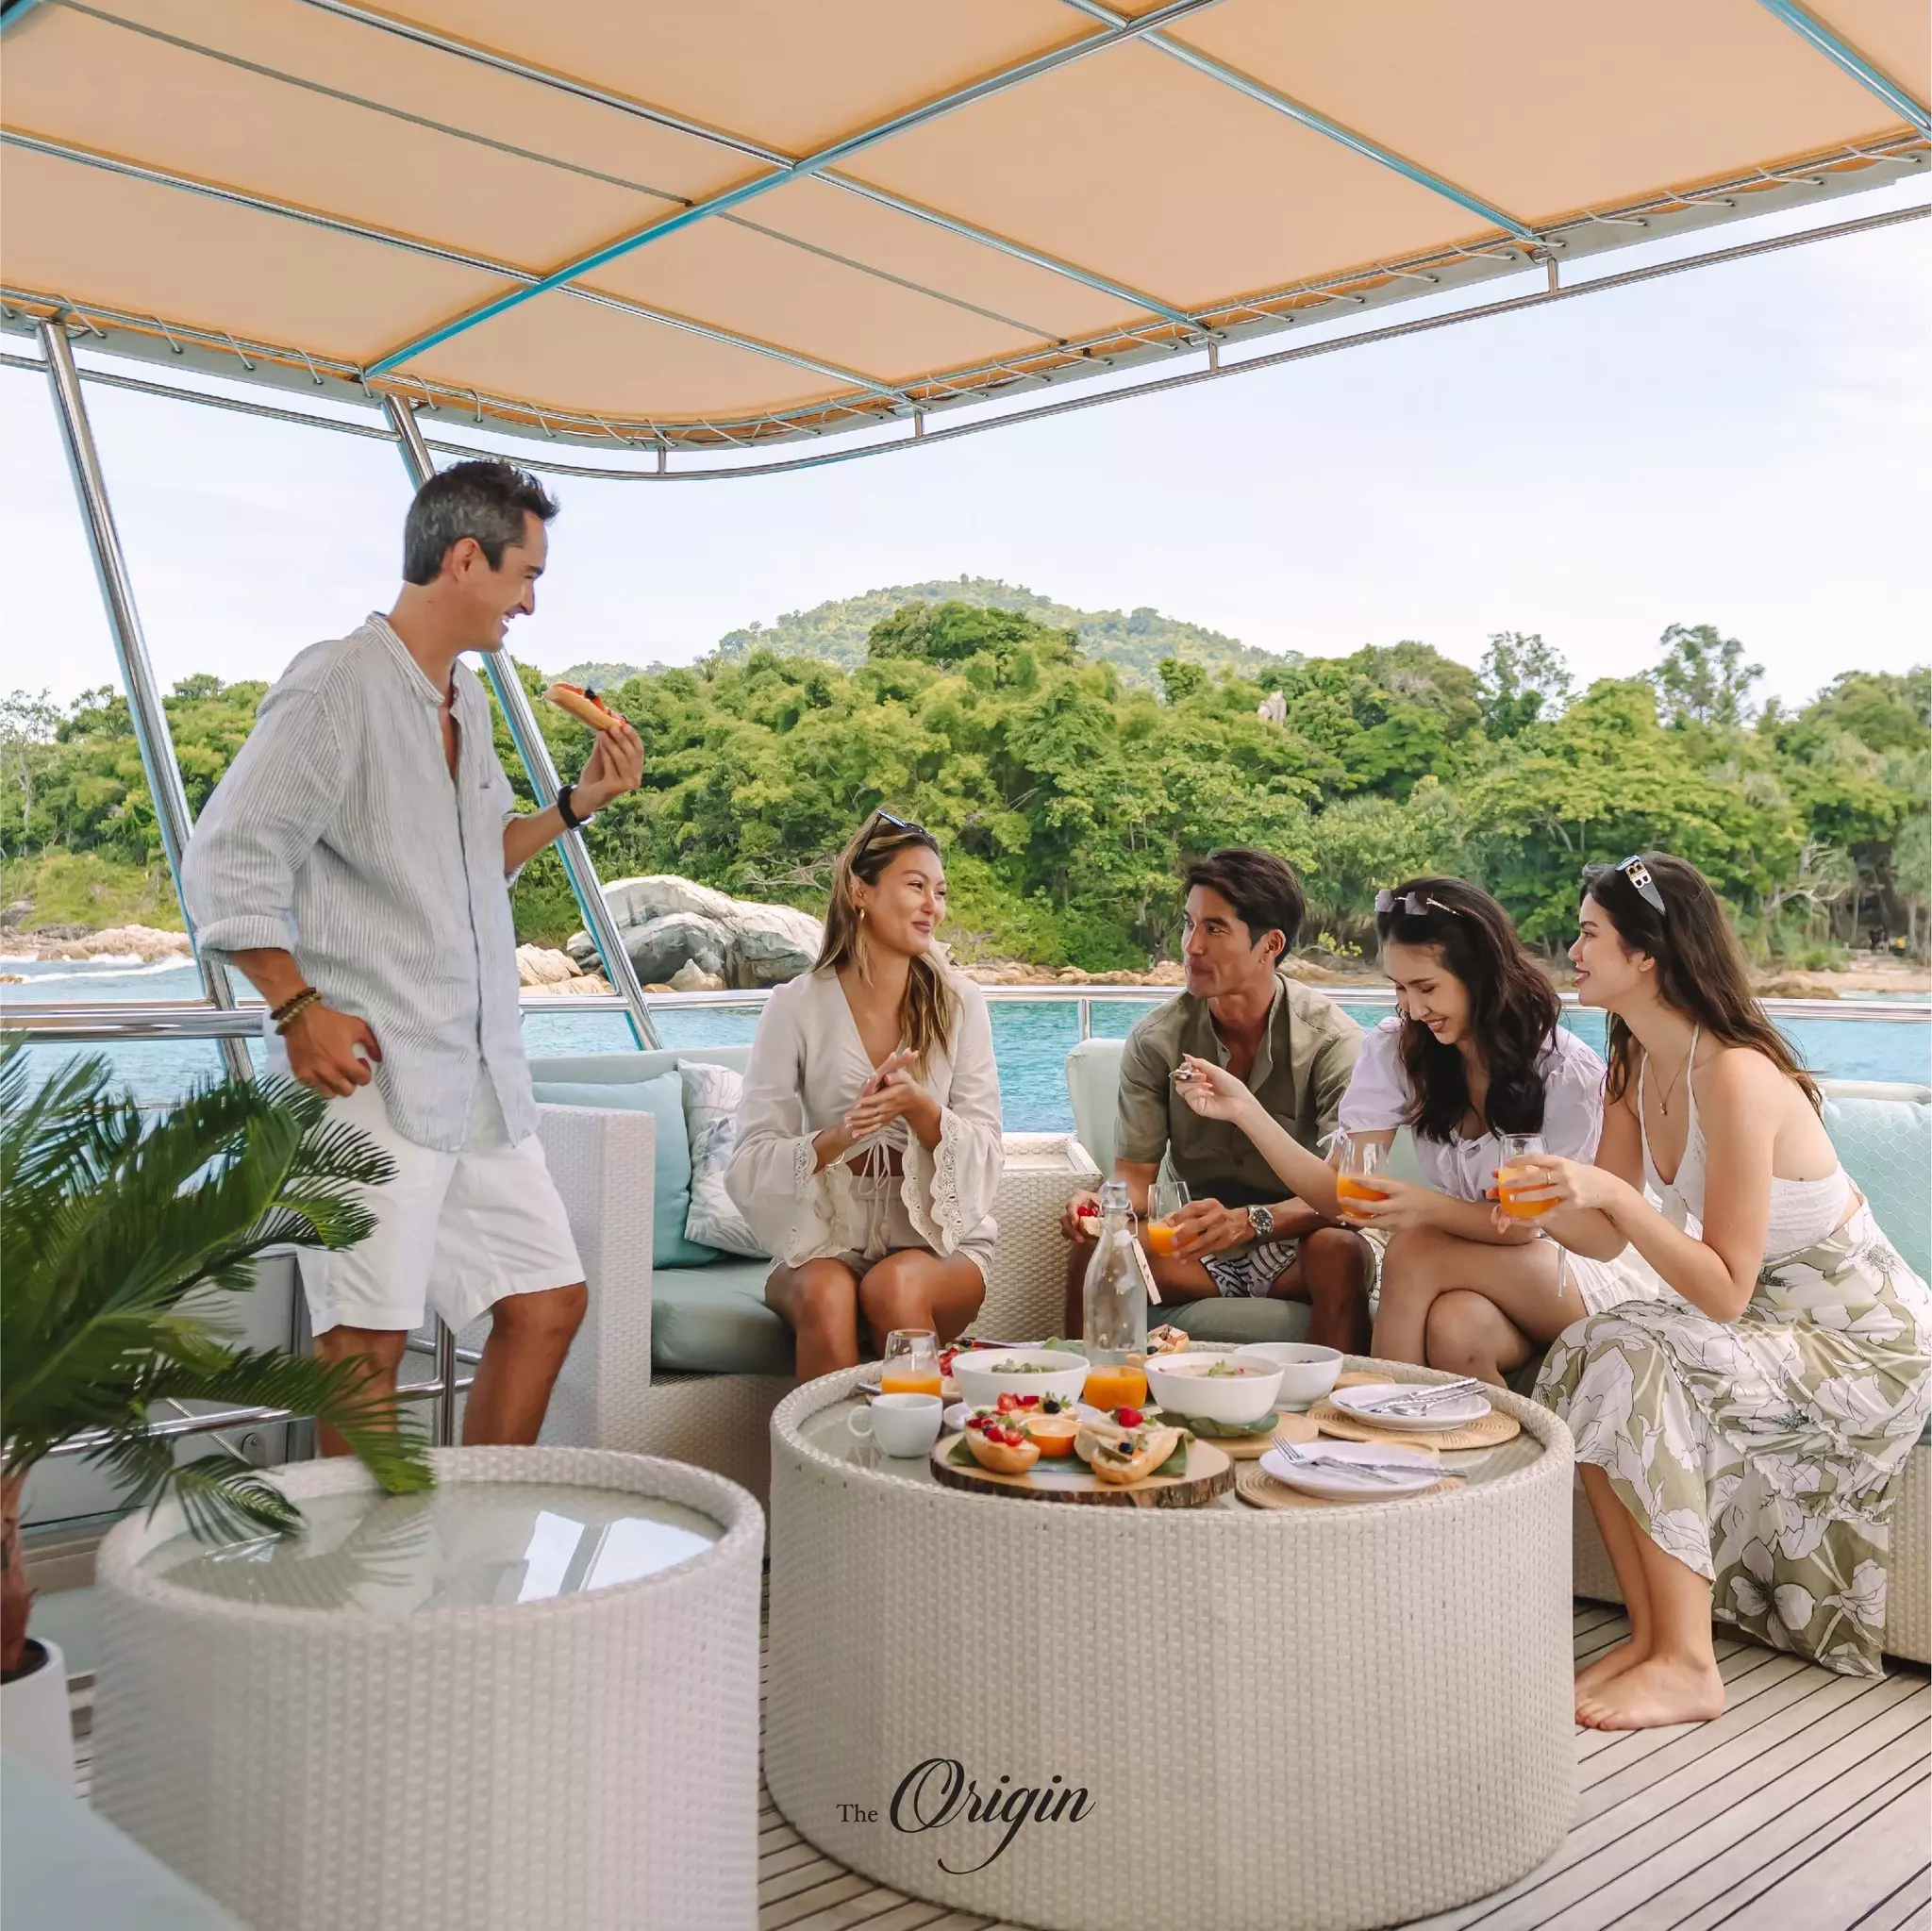 Origin by  - Special Offer for a private Motor Yacht Charter in Pattaya with a crew